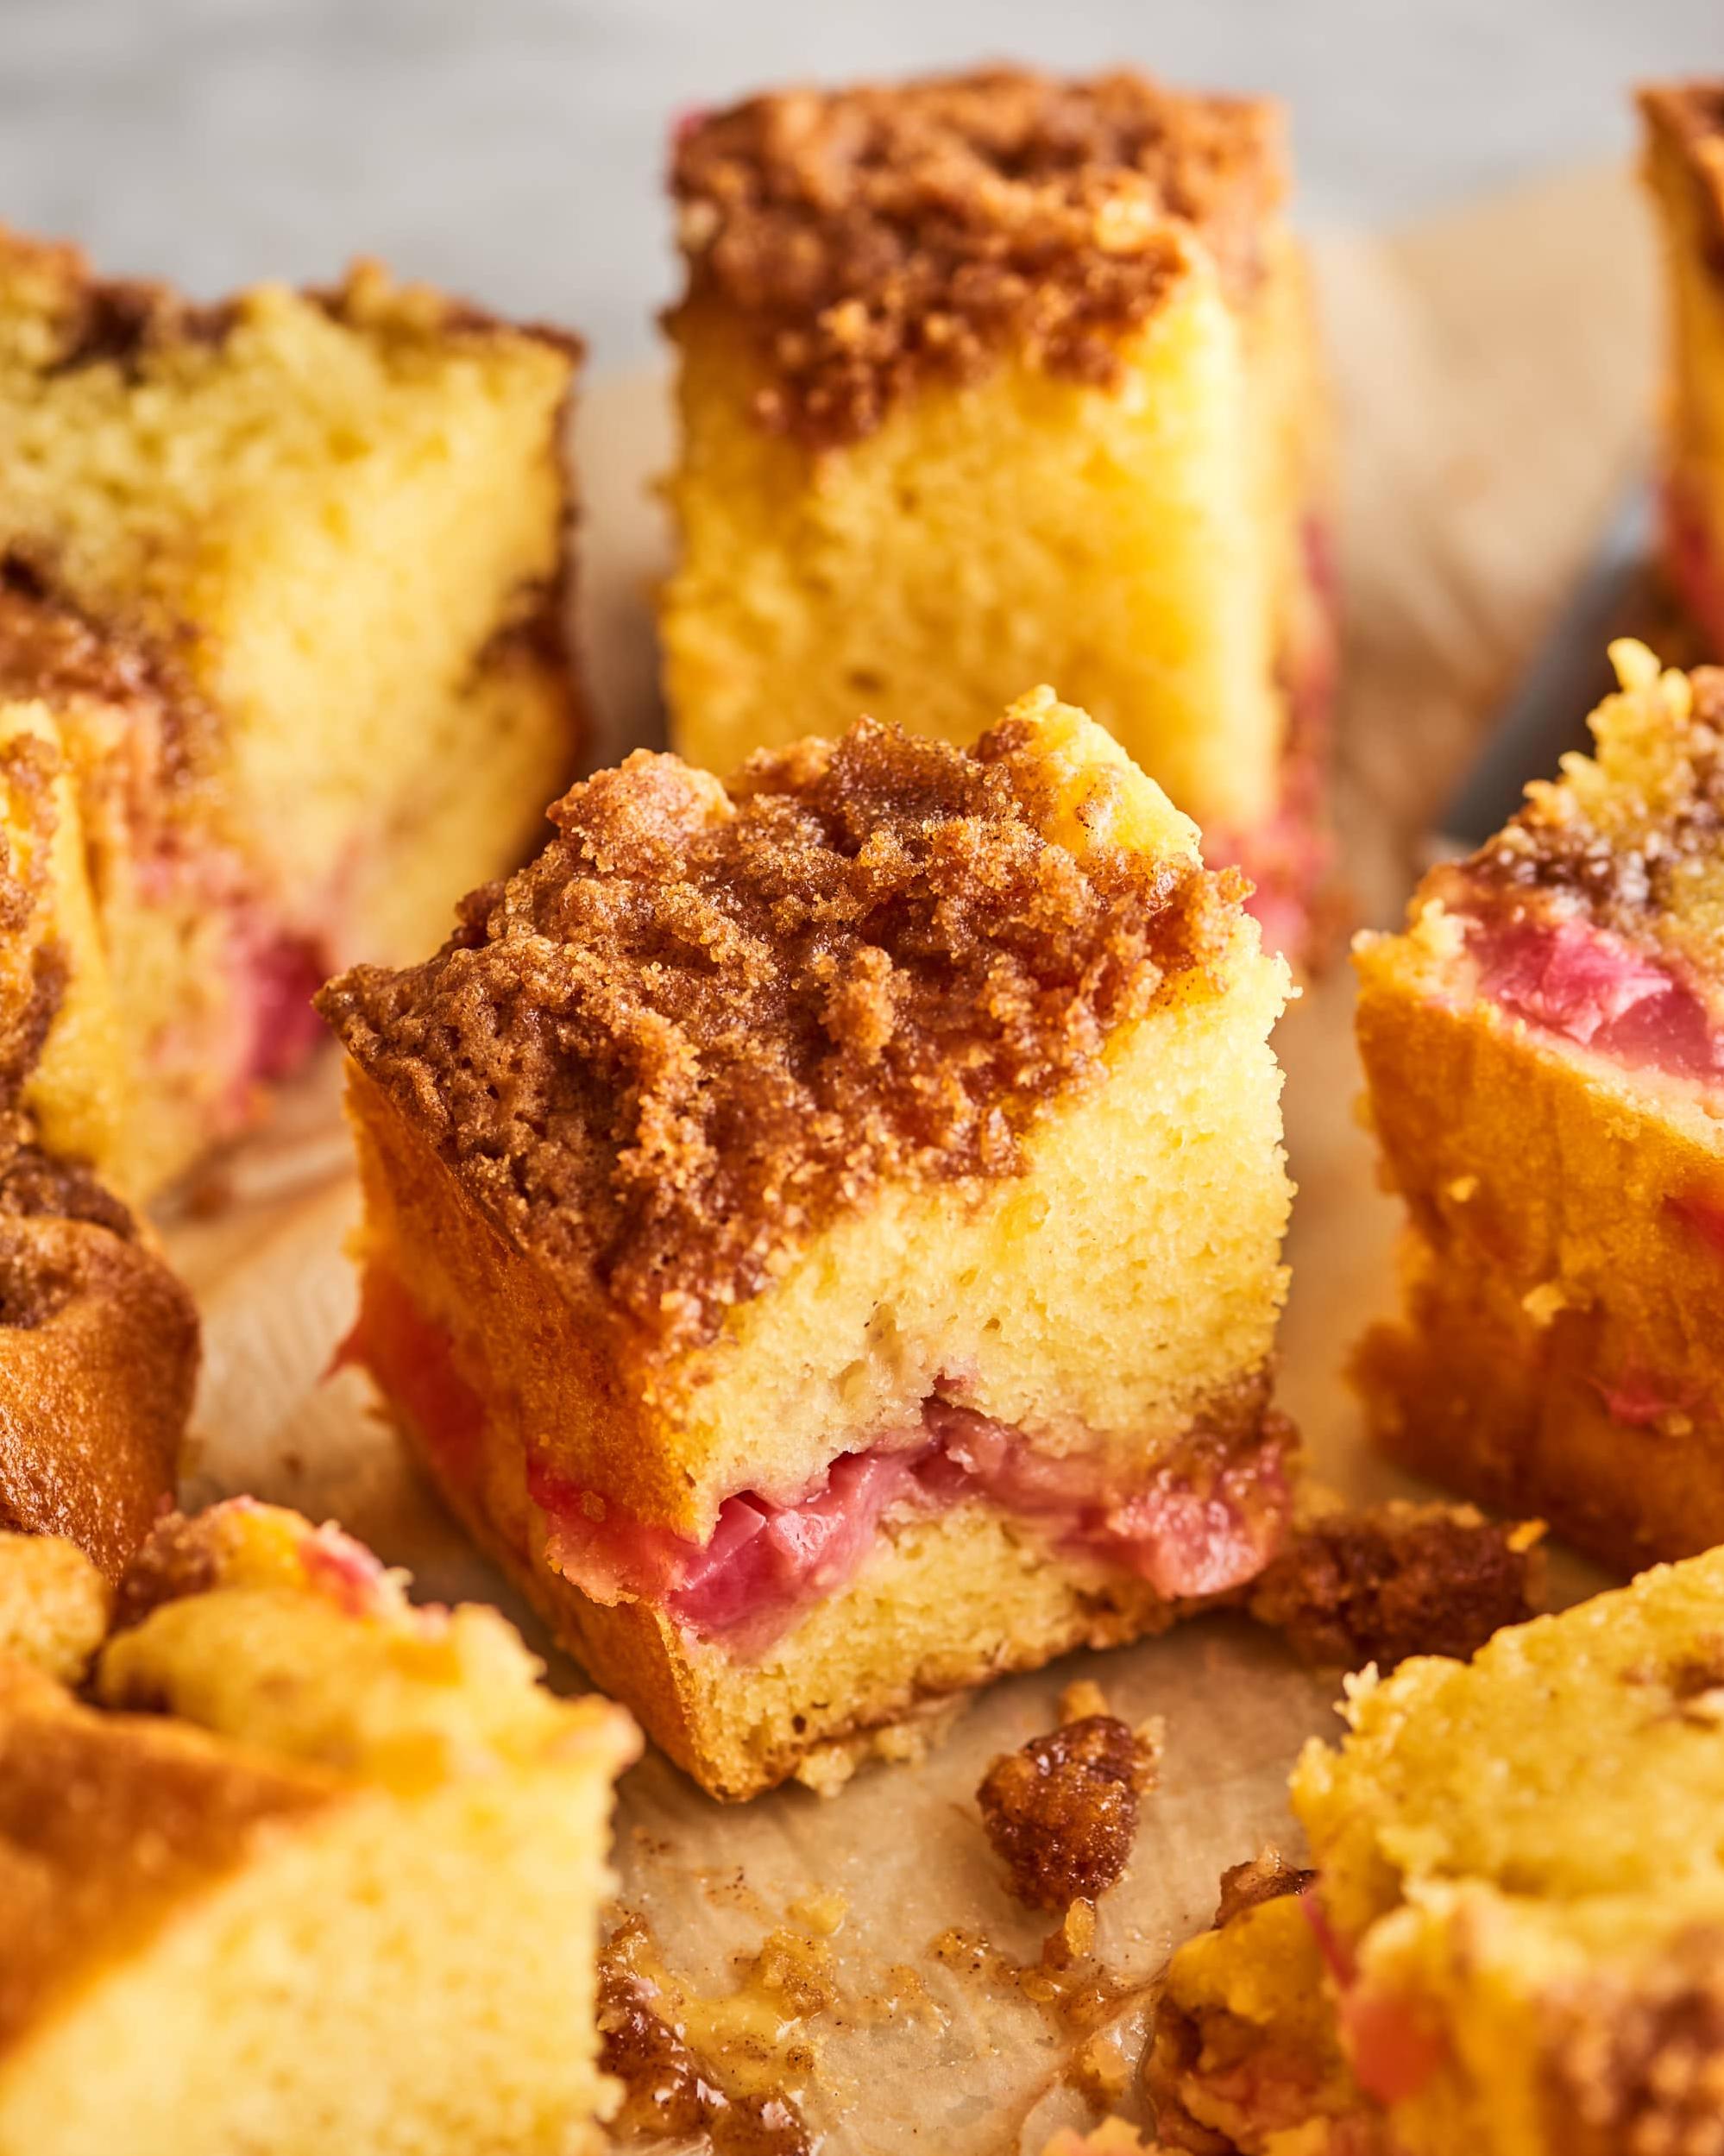  Packed with rhubarb goodness